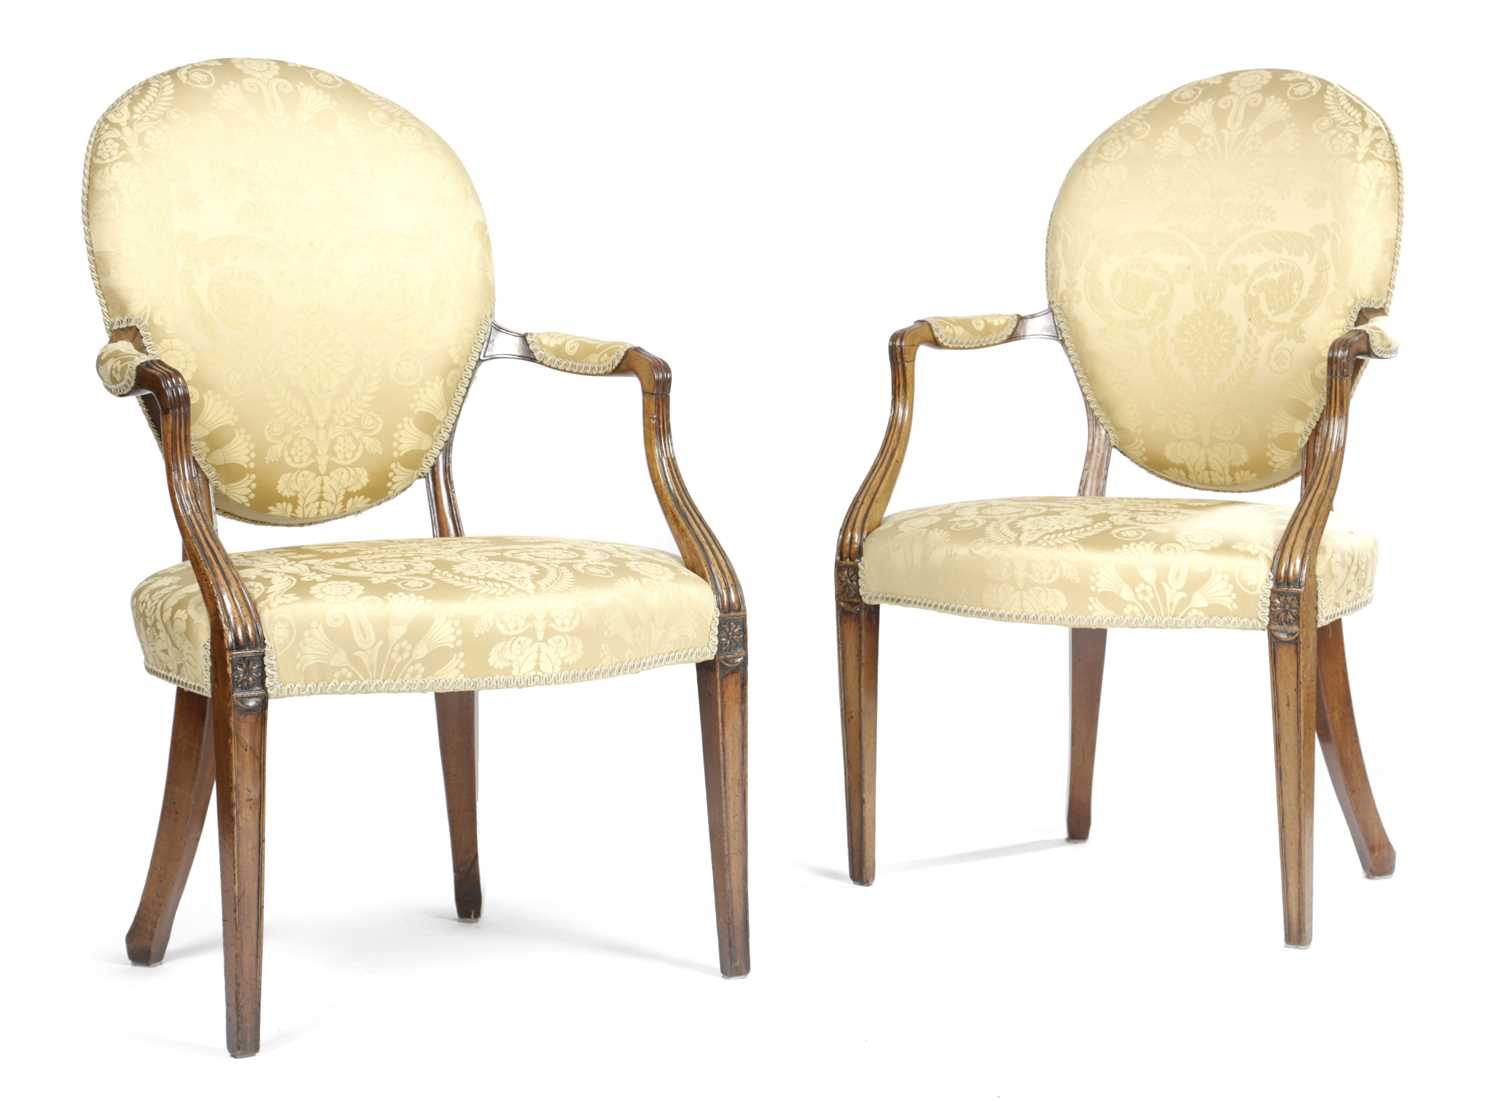 A PAIR OF GEORGE III MAHOGANY ARMCHAIRS LATE 18TH CENTURY each with a padded back, seat and